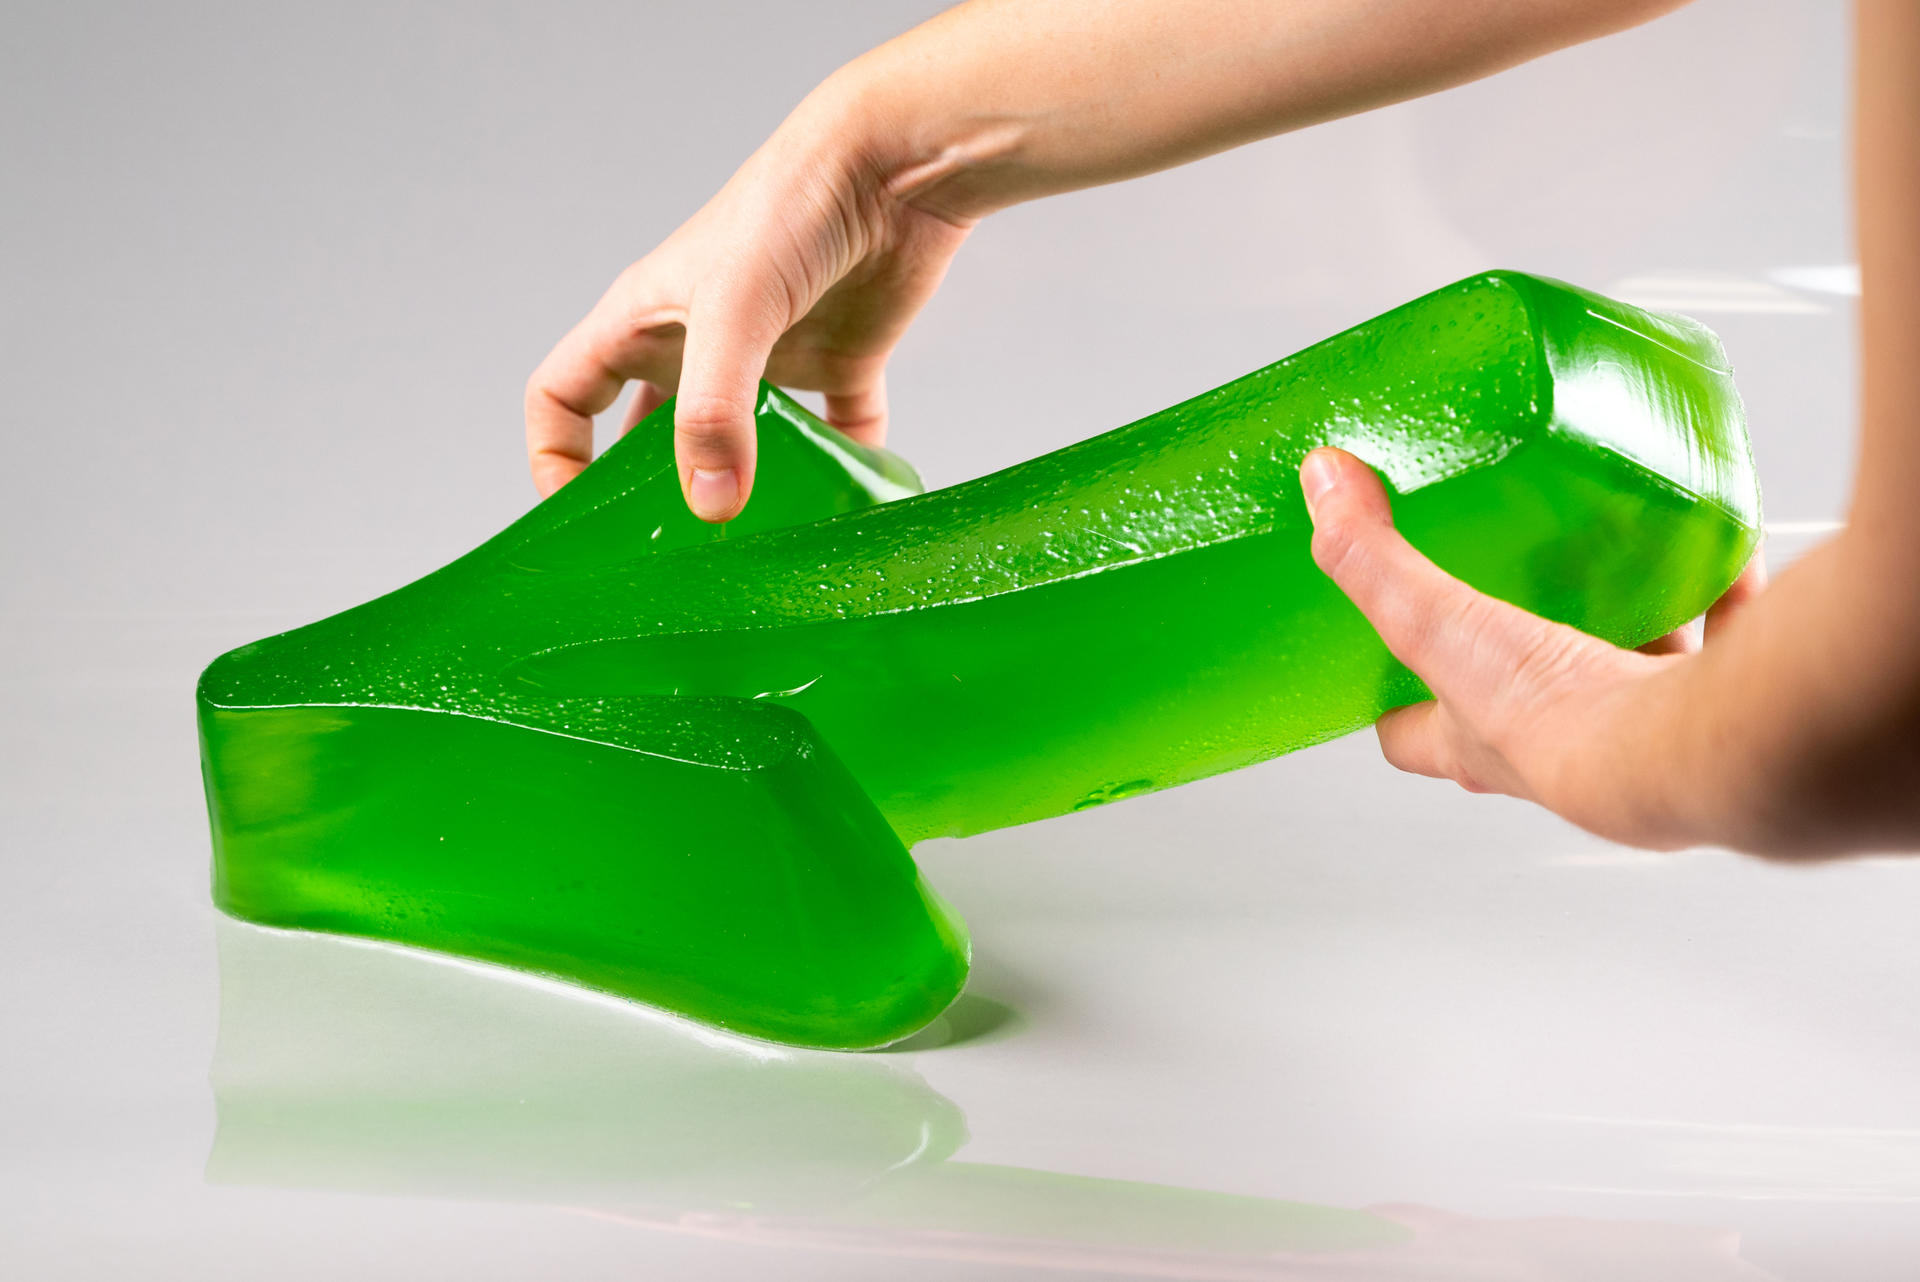 Green gelatin semi-transparent arrow-shaped sculpture, held by two hands.